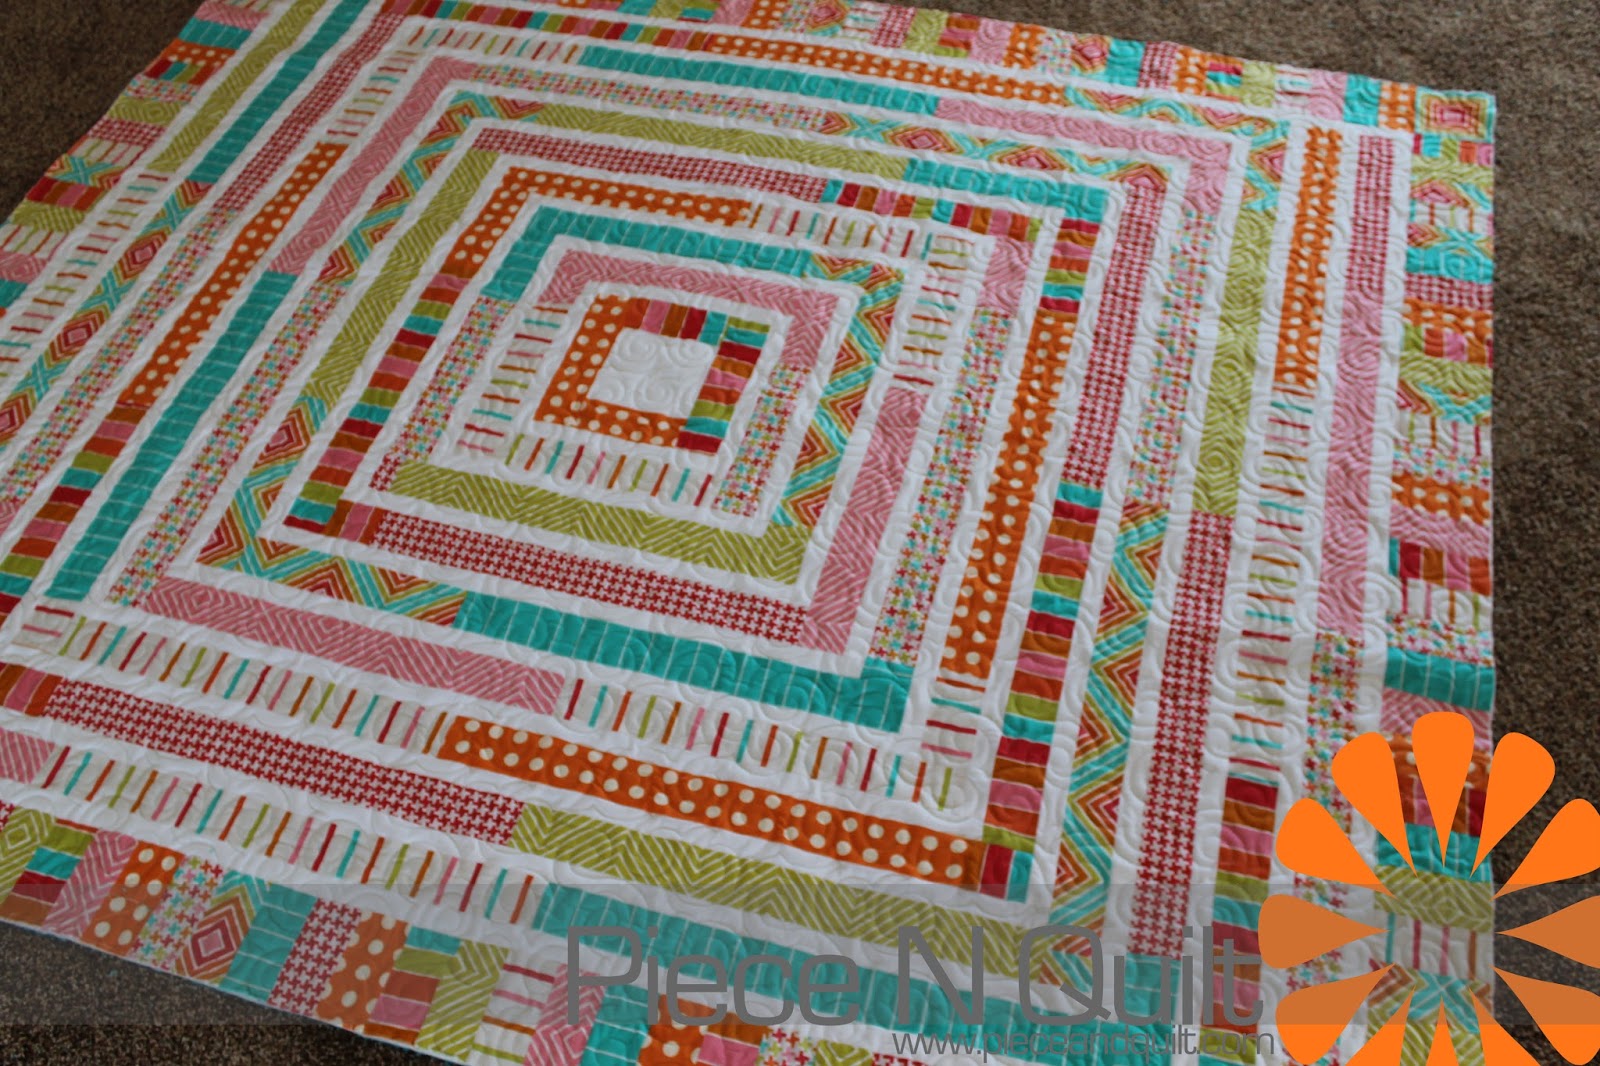 piece-n-quilt-jelly-roll-quilt